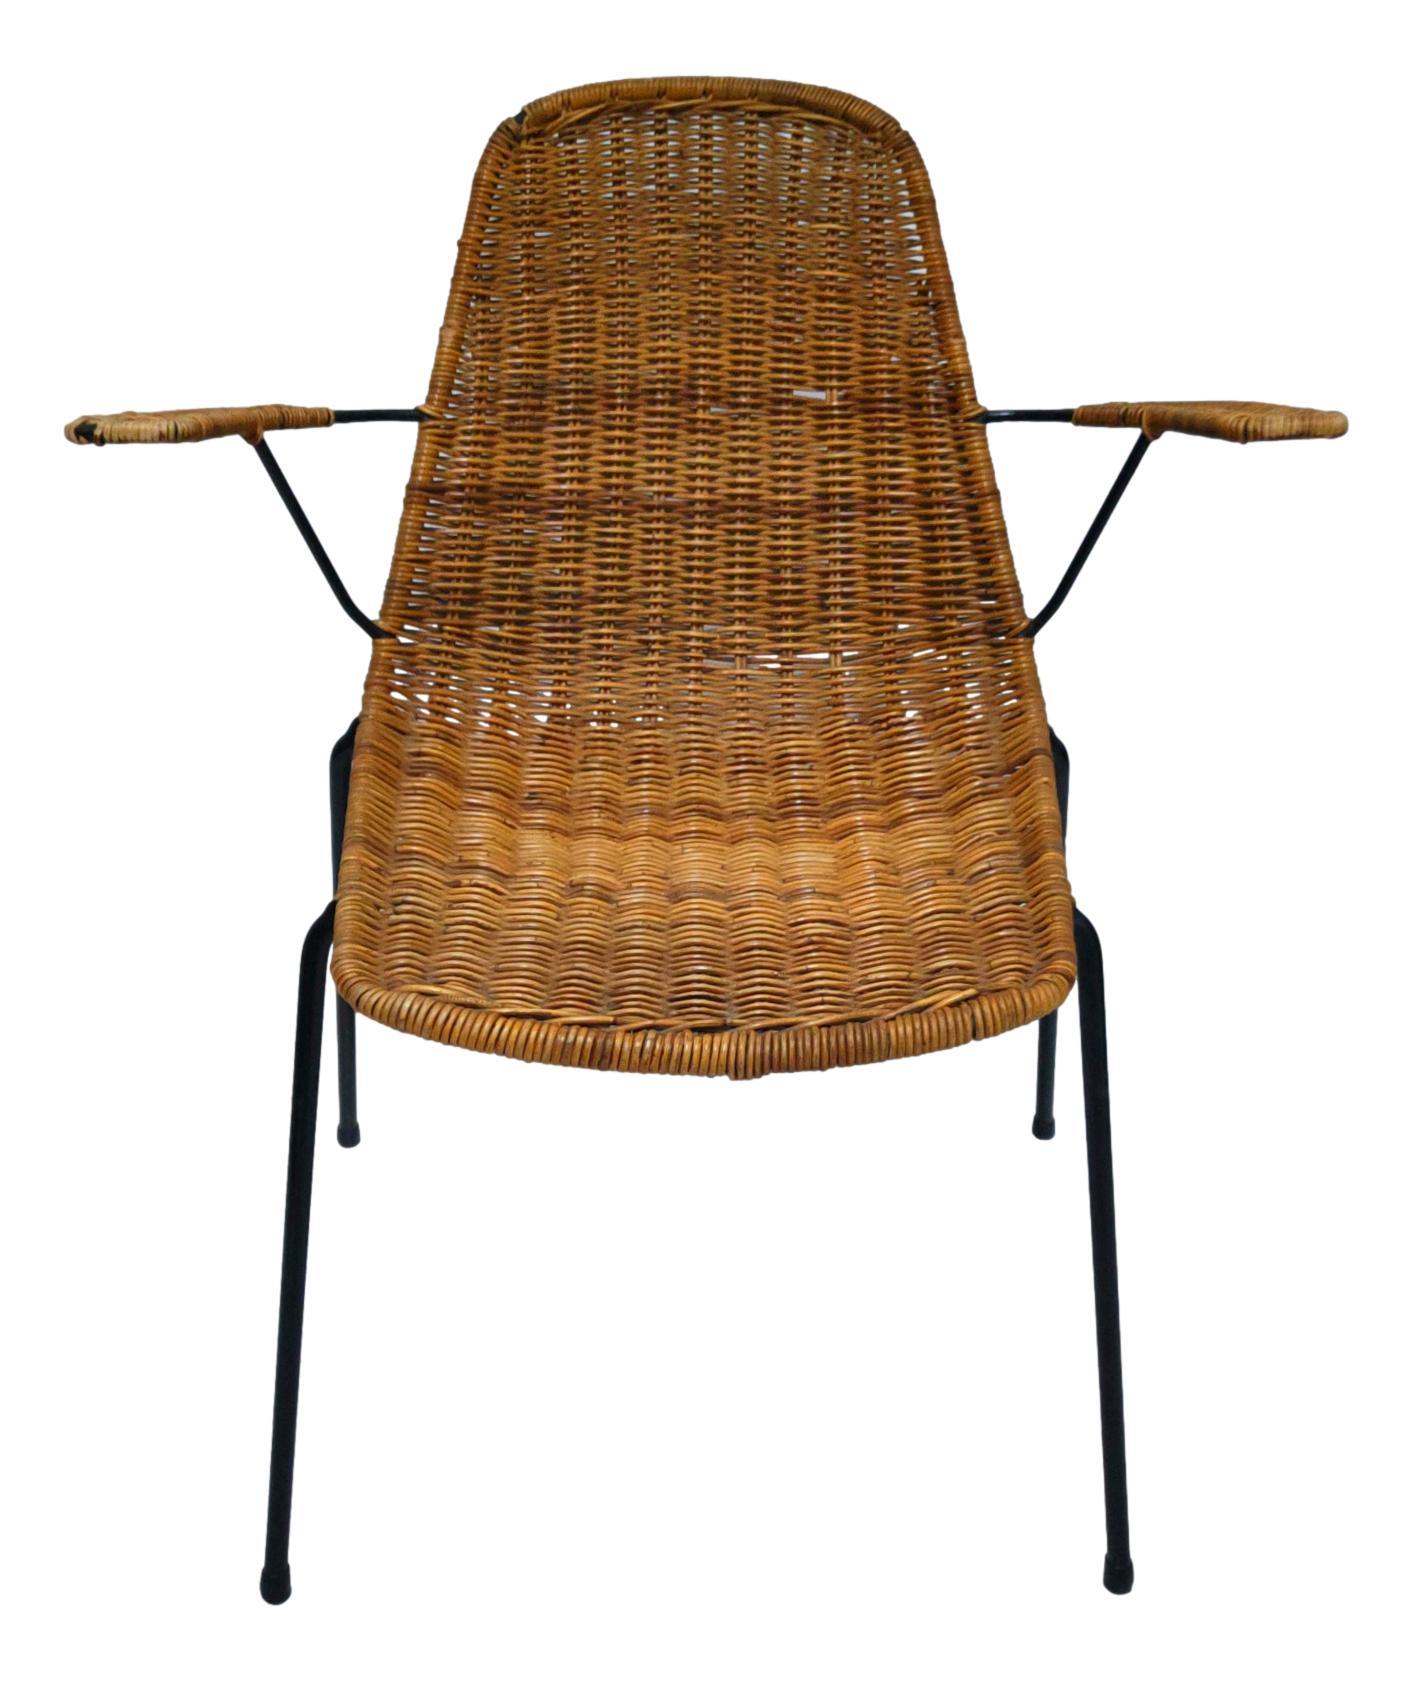 original 1950s armchair, designed by Franco Campo and Carlo Graffi, made of wicker on a black lacquered metal frame.
It measures cm 78 in height, cm 66 in width and cm 55 in depth, the seat height from the floor is cm 45.
Good overall condition,